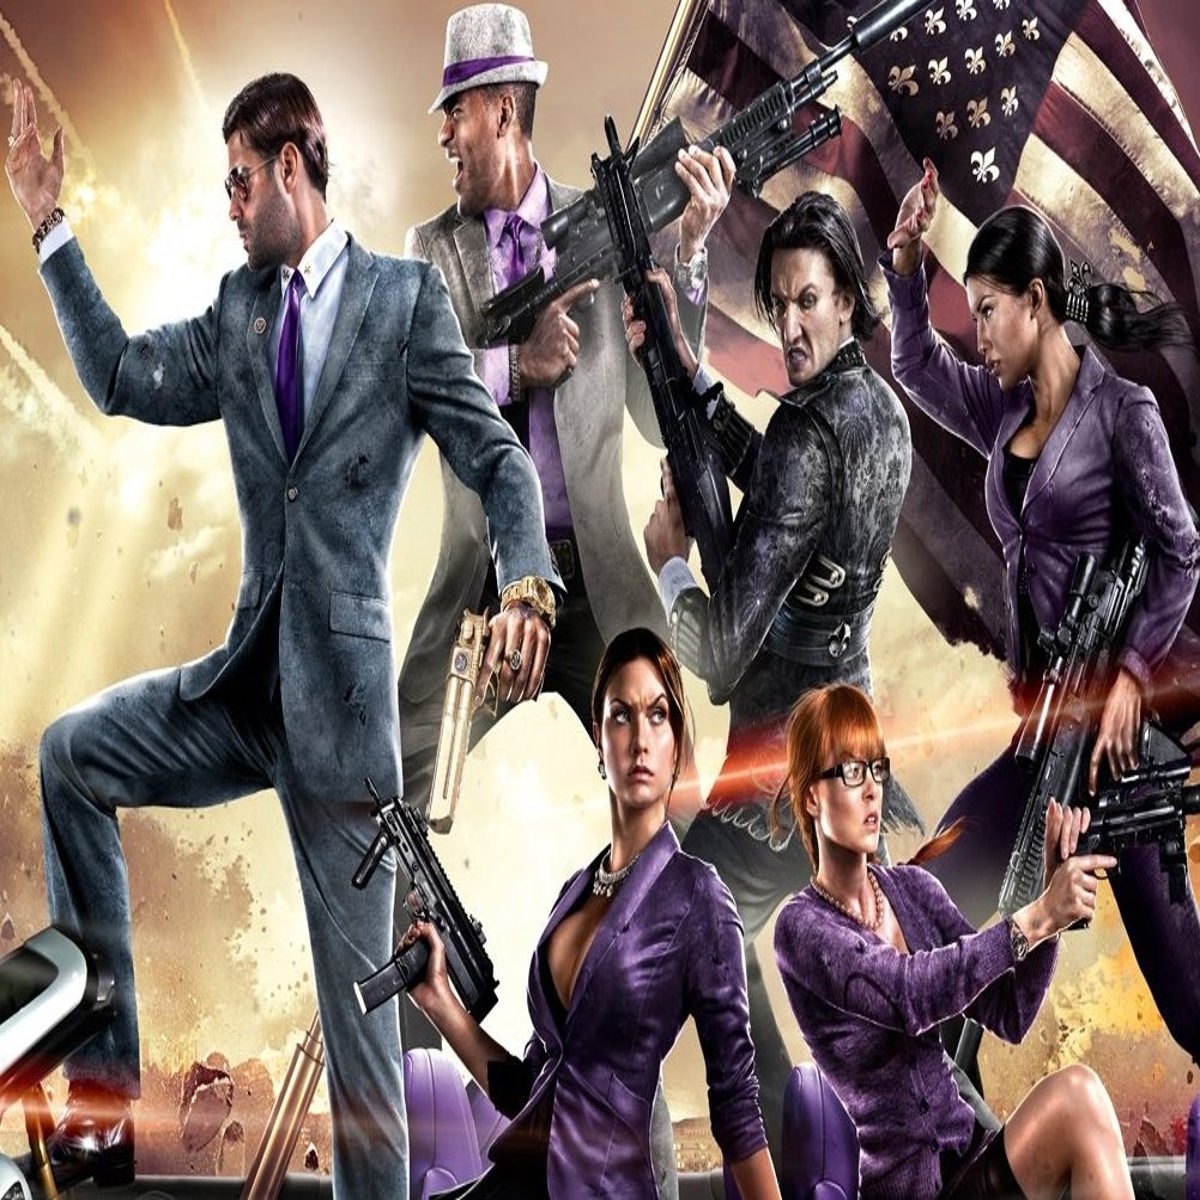 Saints Row IV: Re-Elected Review - It's Just as Good